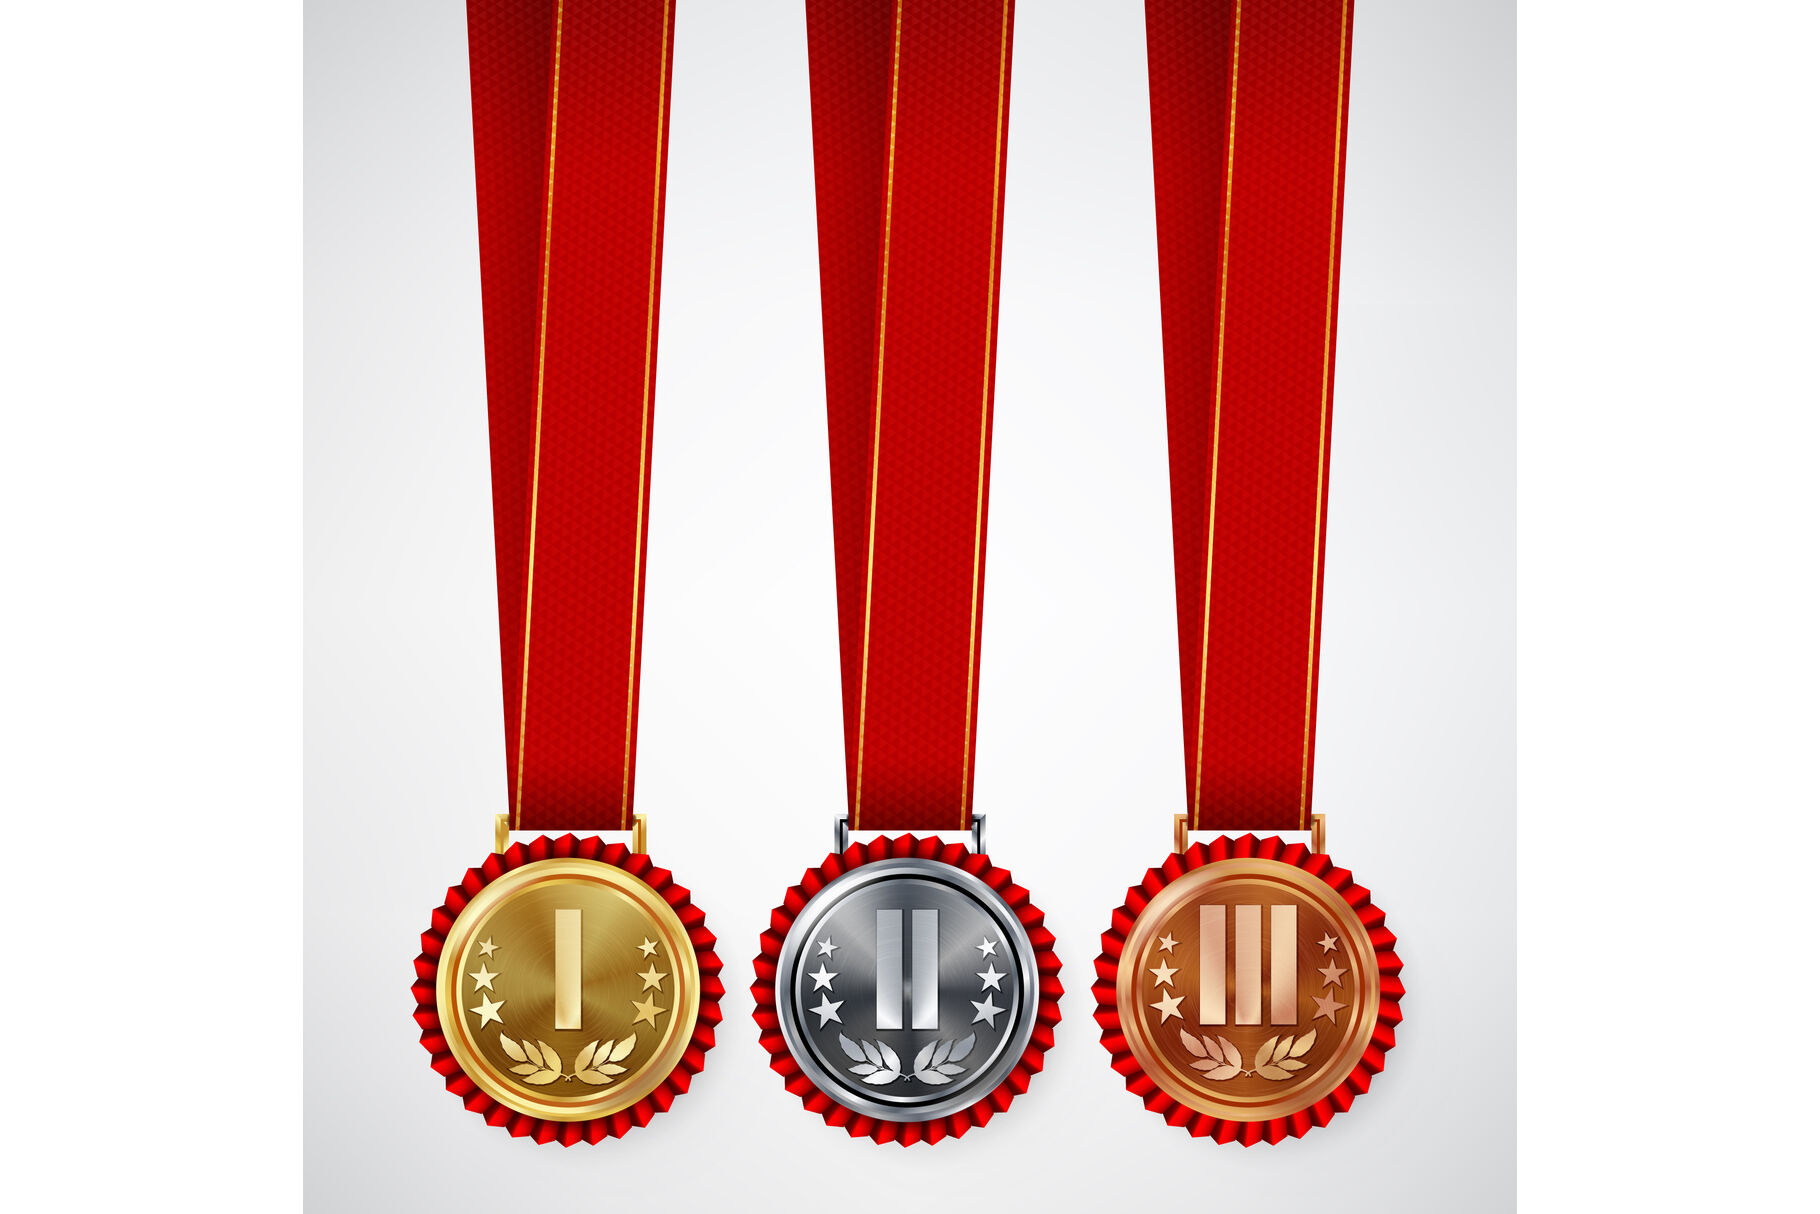 1st 2nd 3rd Place High Relief Award Medals Includes Neck Ribbon Gold, Silver, Bronze 3 Piece Set